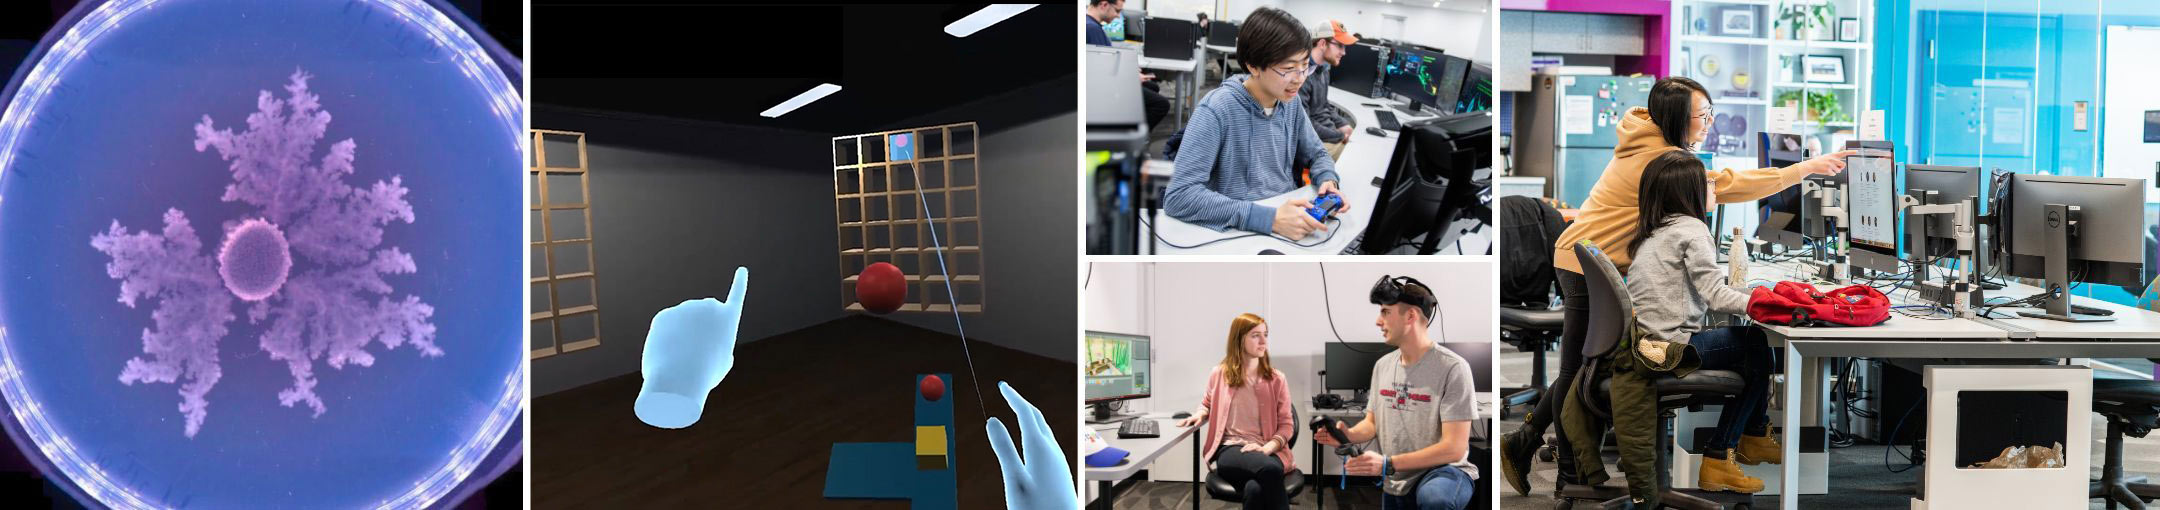 Collage of video game screenshots and photos of students playing and working on video games